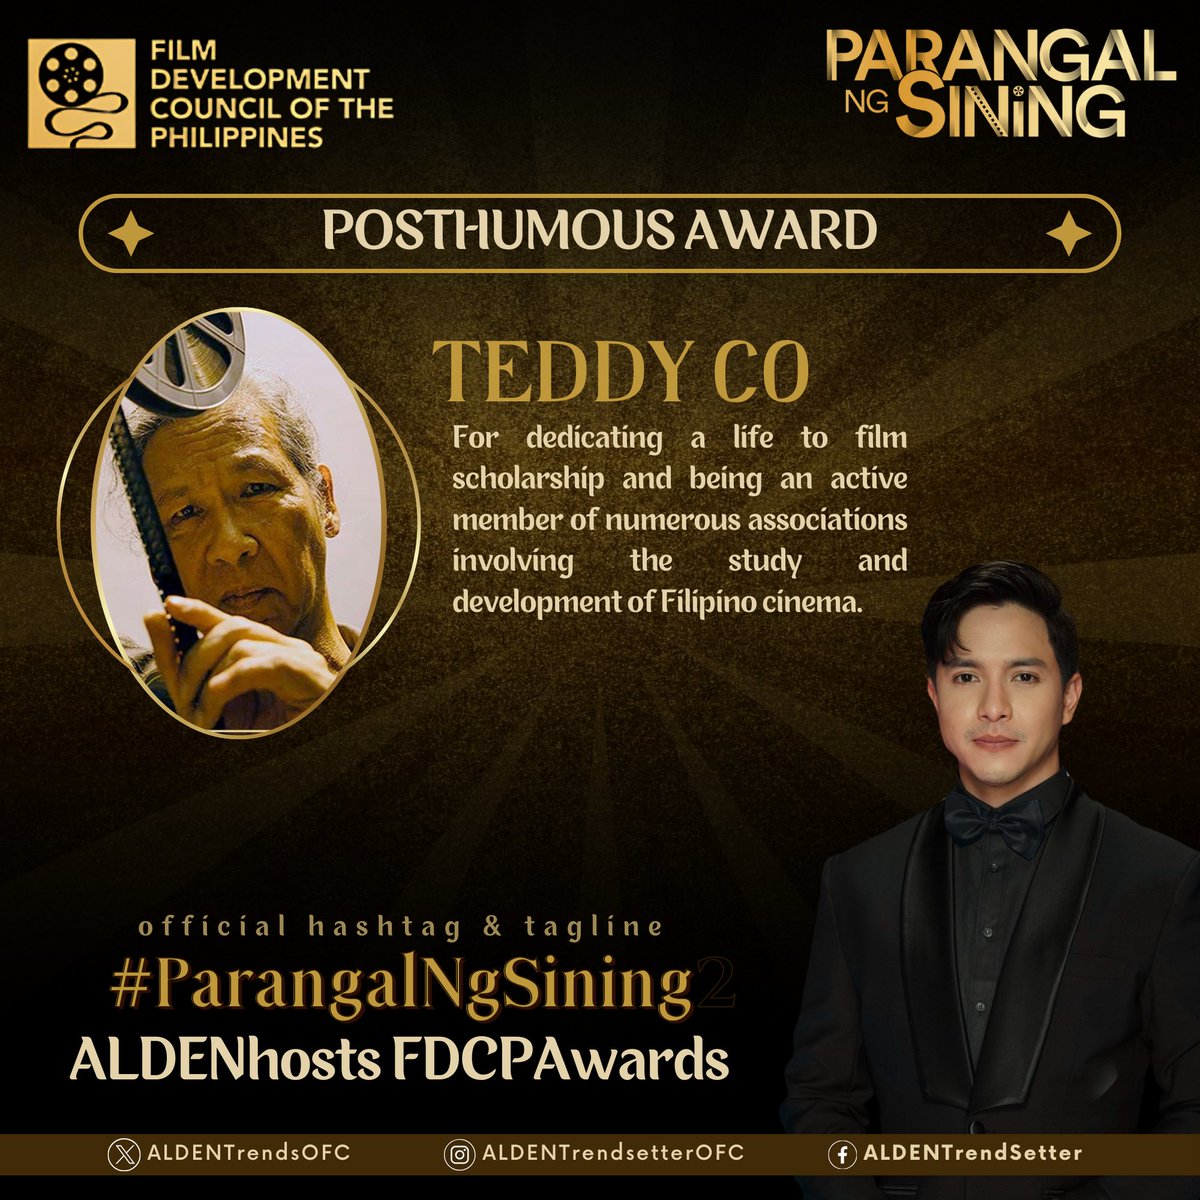 For the Posthumous Award, Mr. Teddy Co, for dedicating his life to enriching film scholarship and numerous organizations in developing Filipino cinema. He will TRULY BE REMEMBERED! ❤️ @aldenrichards02 @fdcpofficial #ParangalNgSining #ALDENRichards ALDENhosts FDCPAwards 🌐 |